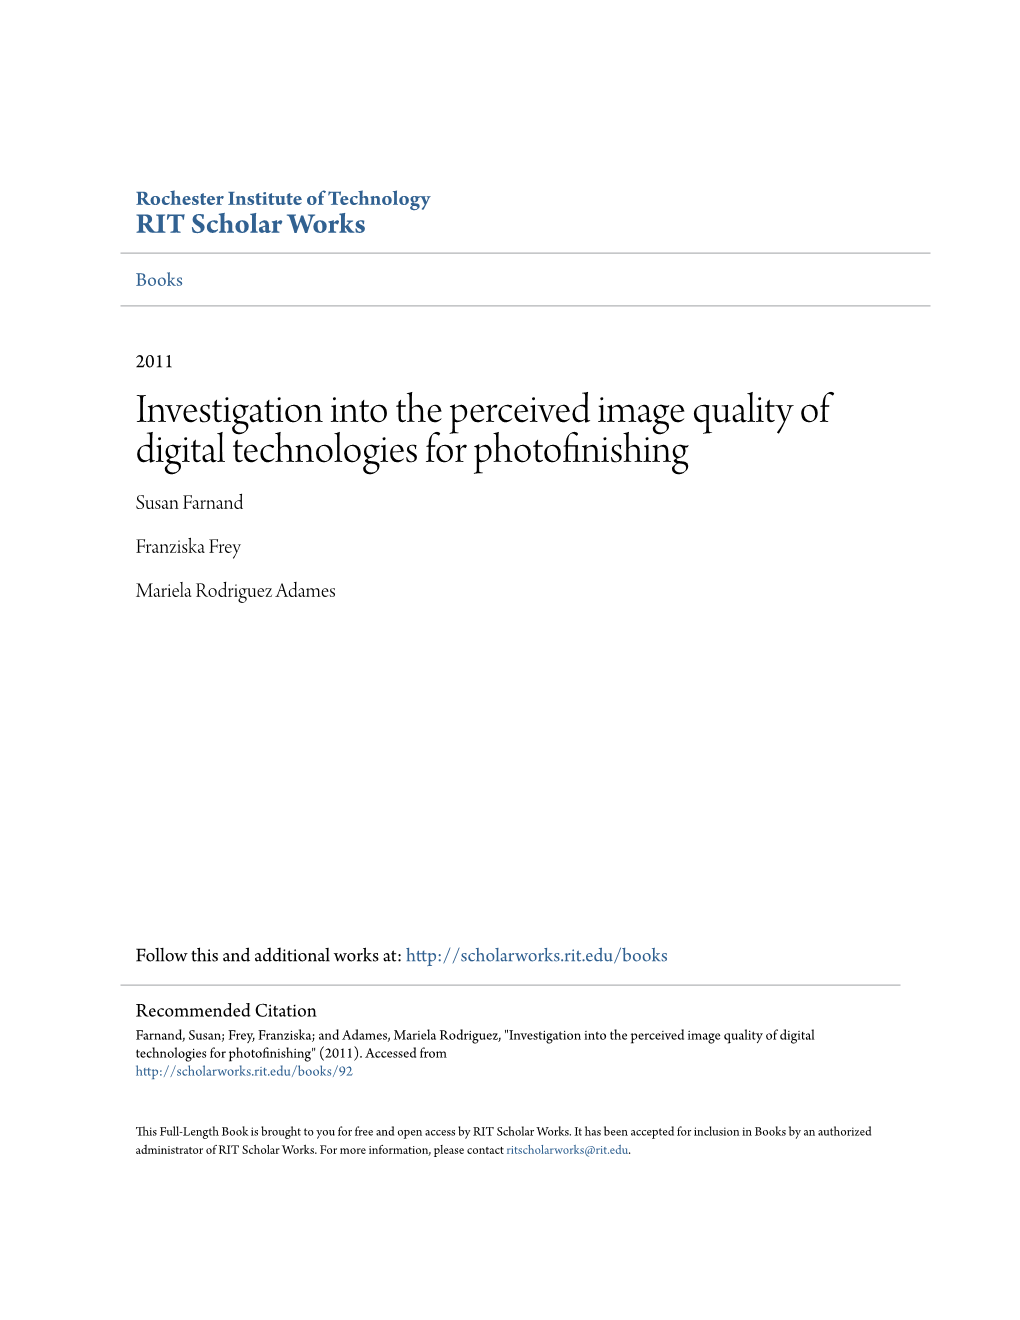 Investigation Into the Perceived Image Quality of Digital Technologies for Photofinishing Susan Farnand